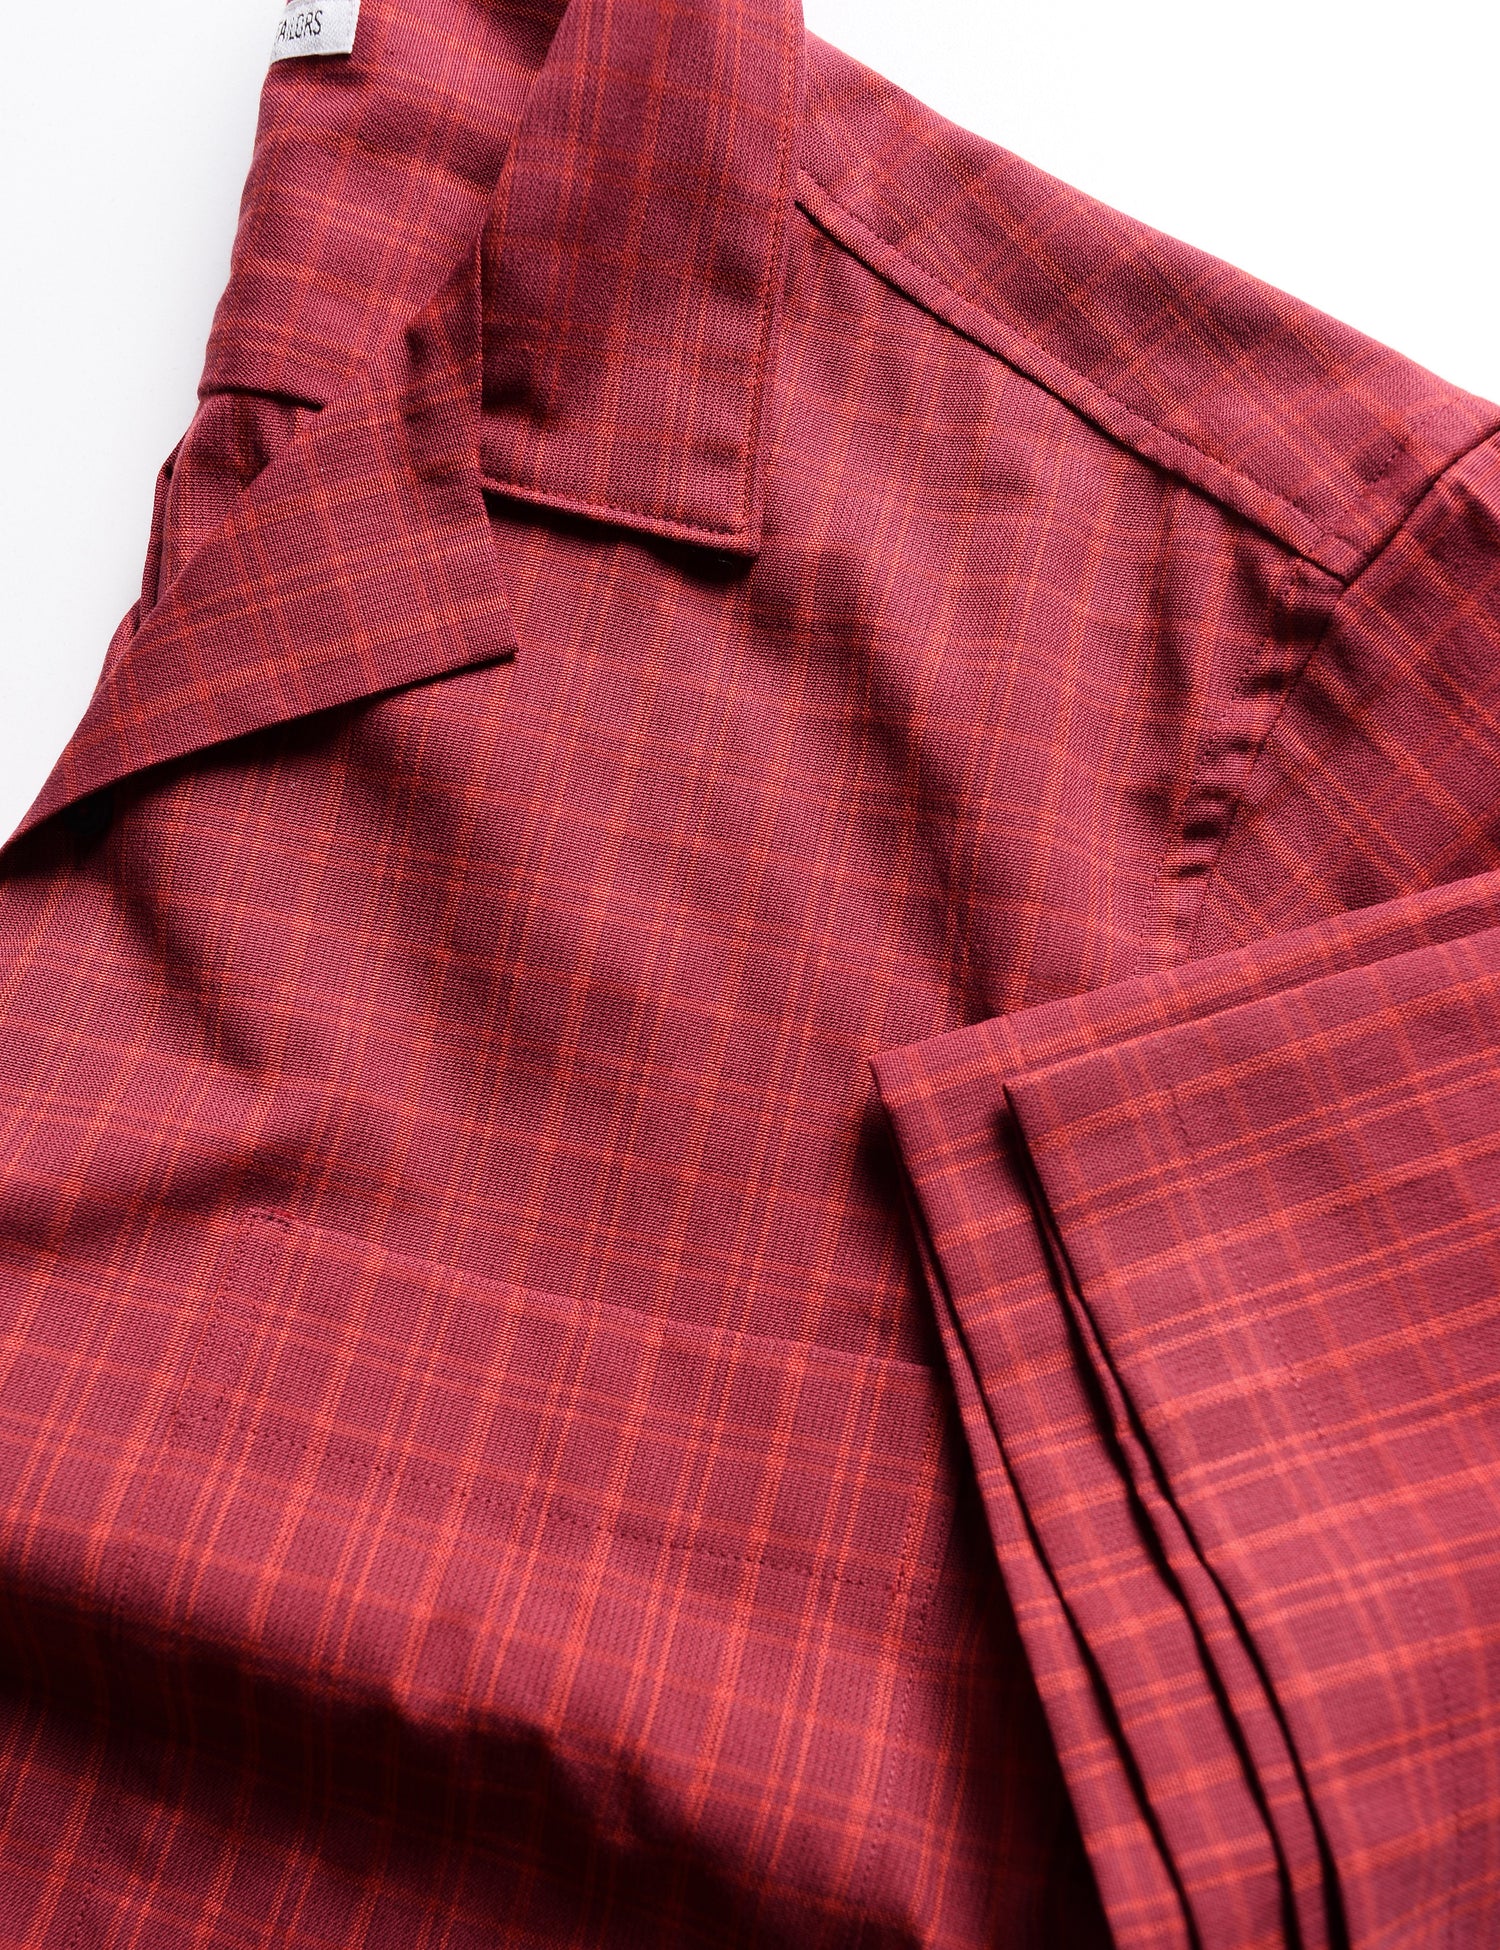 Detail of BKT18 Camp Shirt in Roman Check - Siena Red showing fabric pattern, camp collar, and sleeve